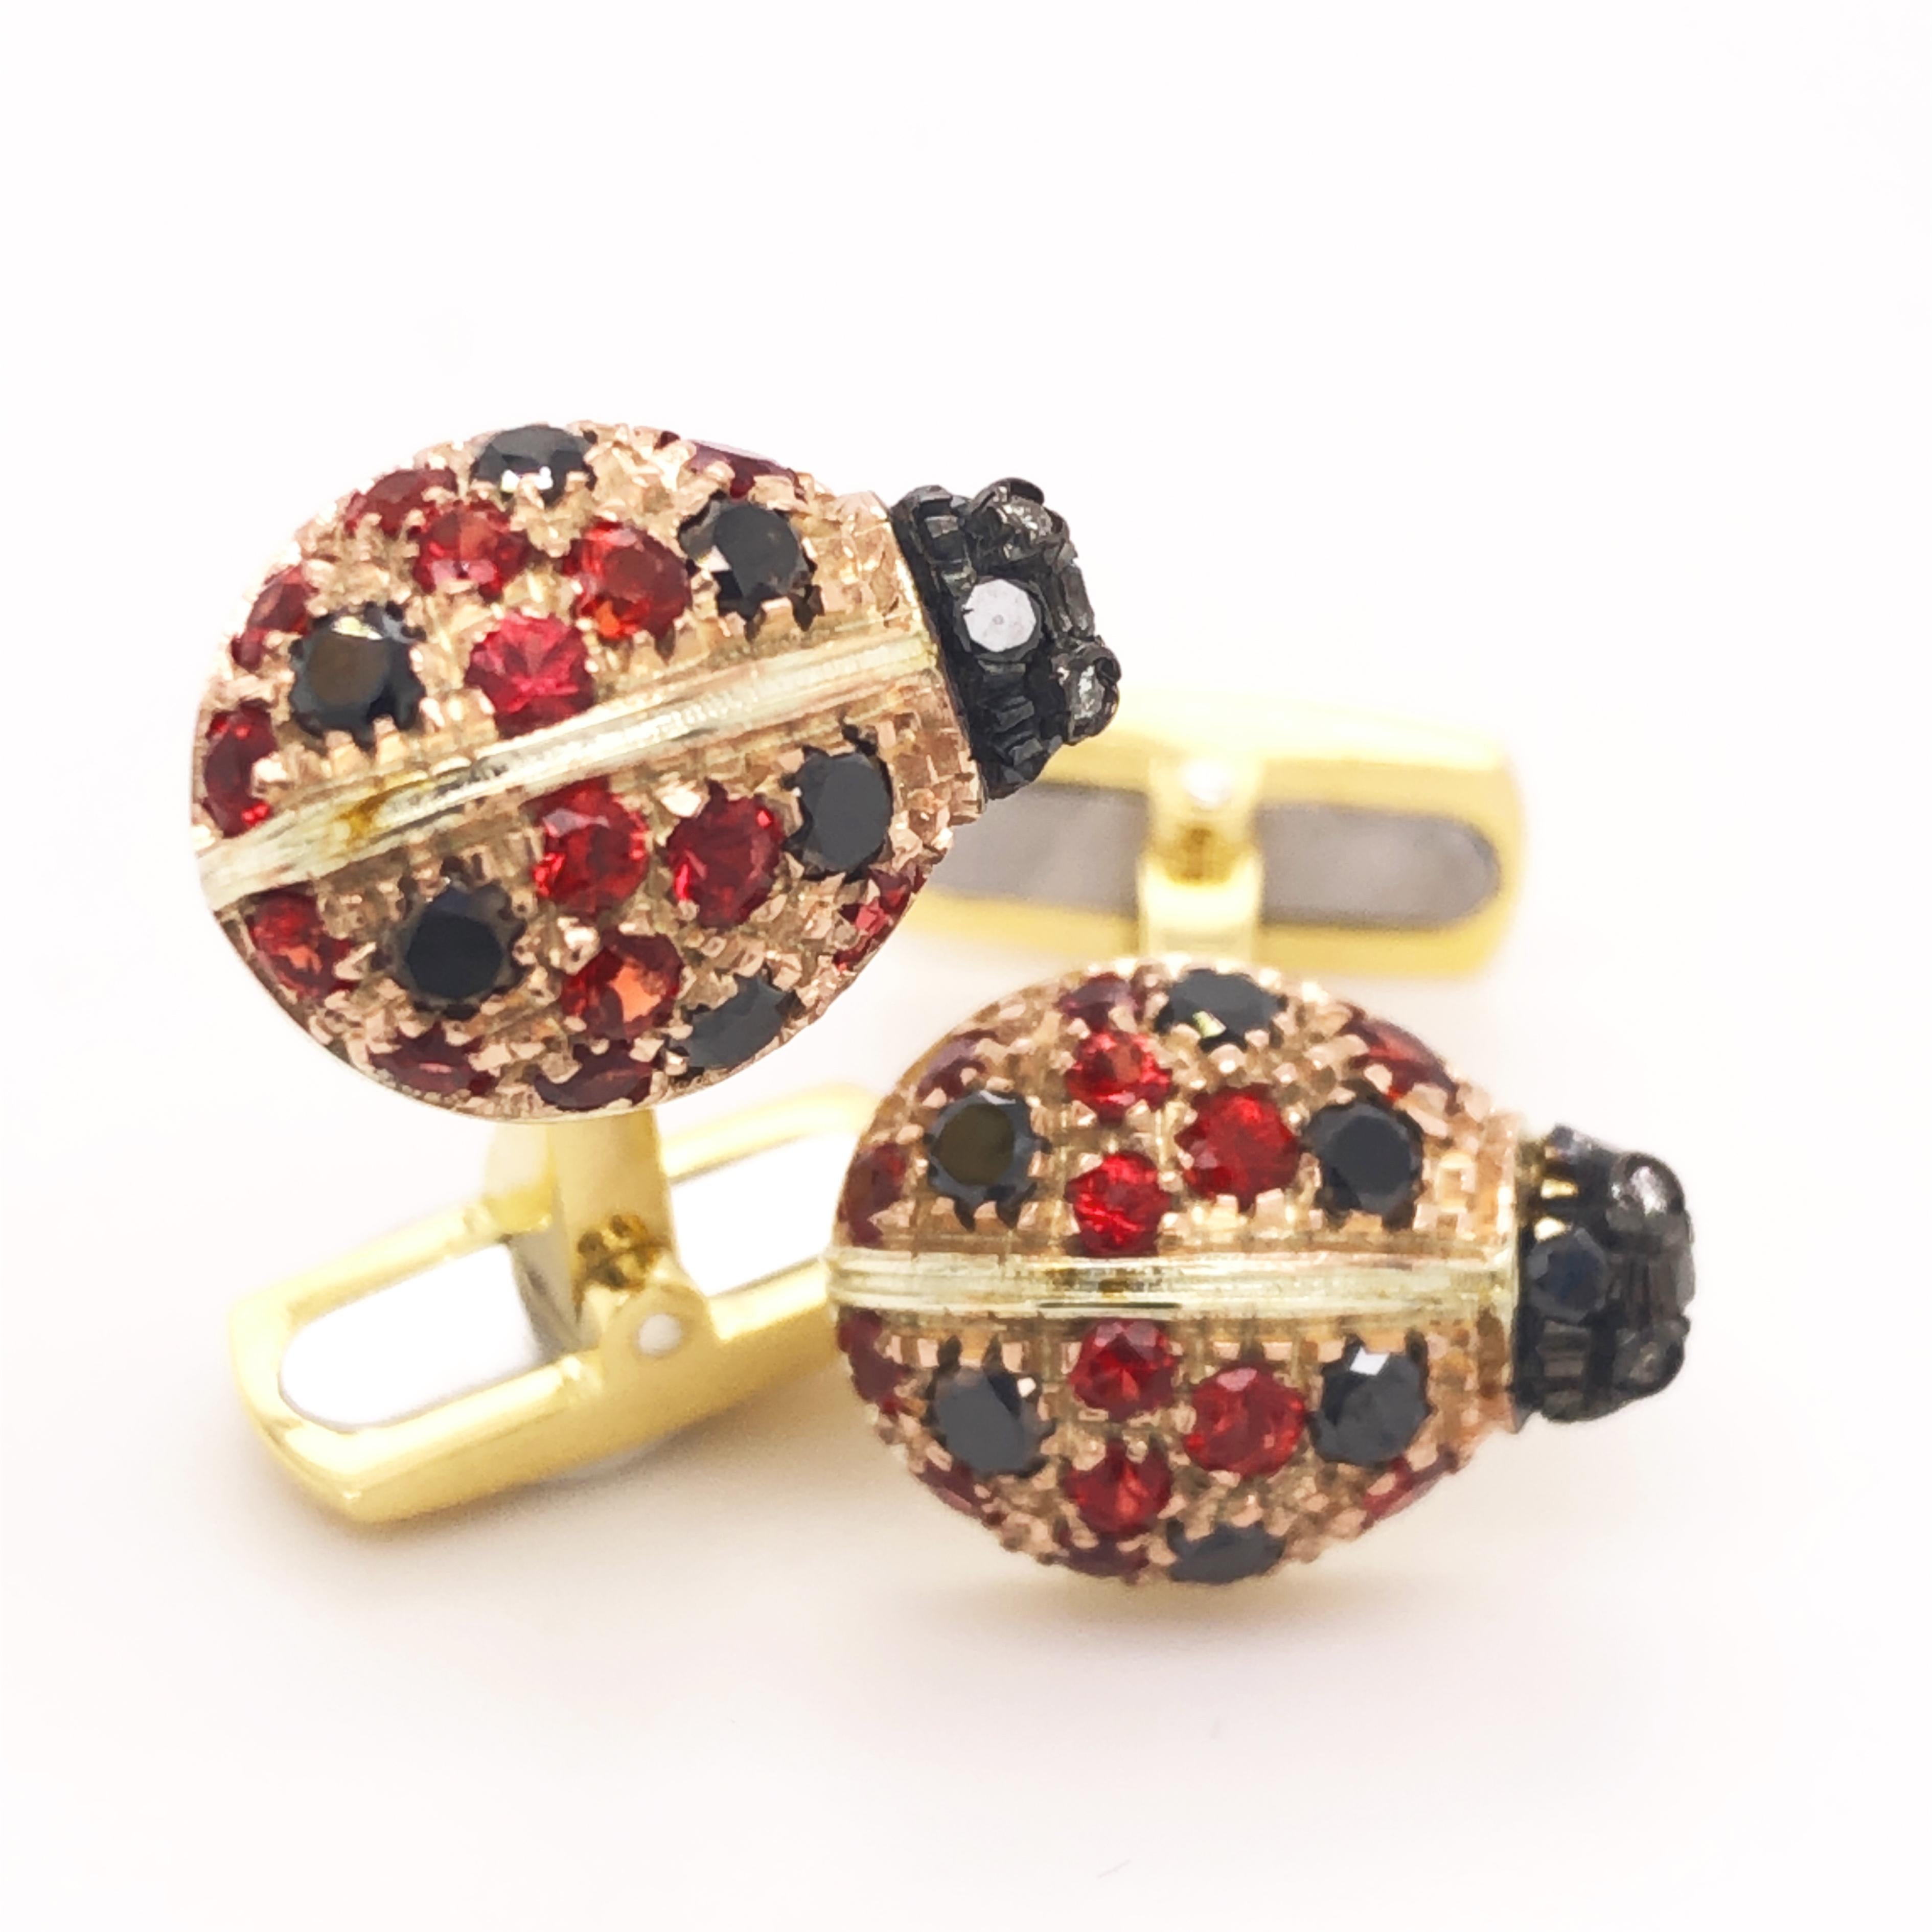 Chic and Unique, Smart yet not Traditional 0.75Kt Black, 0.03Kt White Diamond, 1.10kt Ruby Little Ladybug Shaped T-Bar Back, 18K Rose and Yellow Gold Setting Cufflinks.
In our smart Tobacco Leather Case and Pouch.



